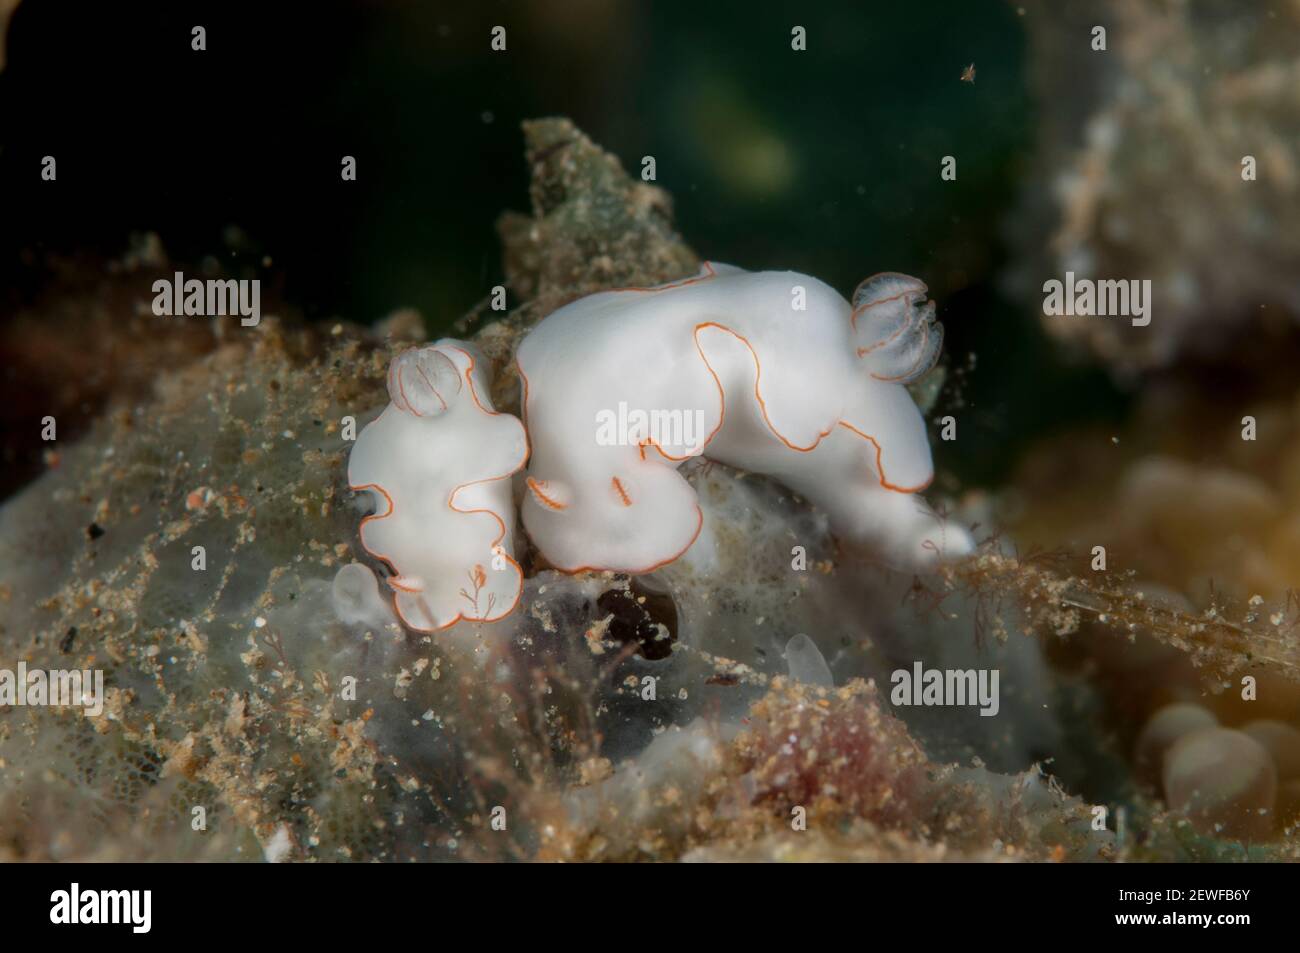 Pair of Cryptic Thorunna Nudibranches, Thorunna furtive, Rhino City dive site, Ambon, Moluccas, Indonesia Stock Photo